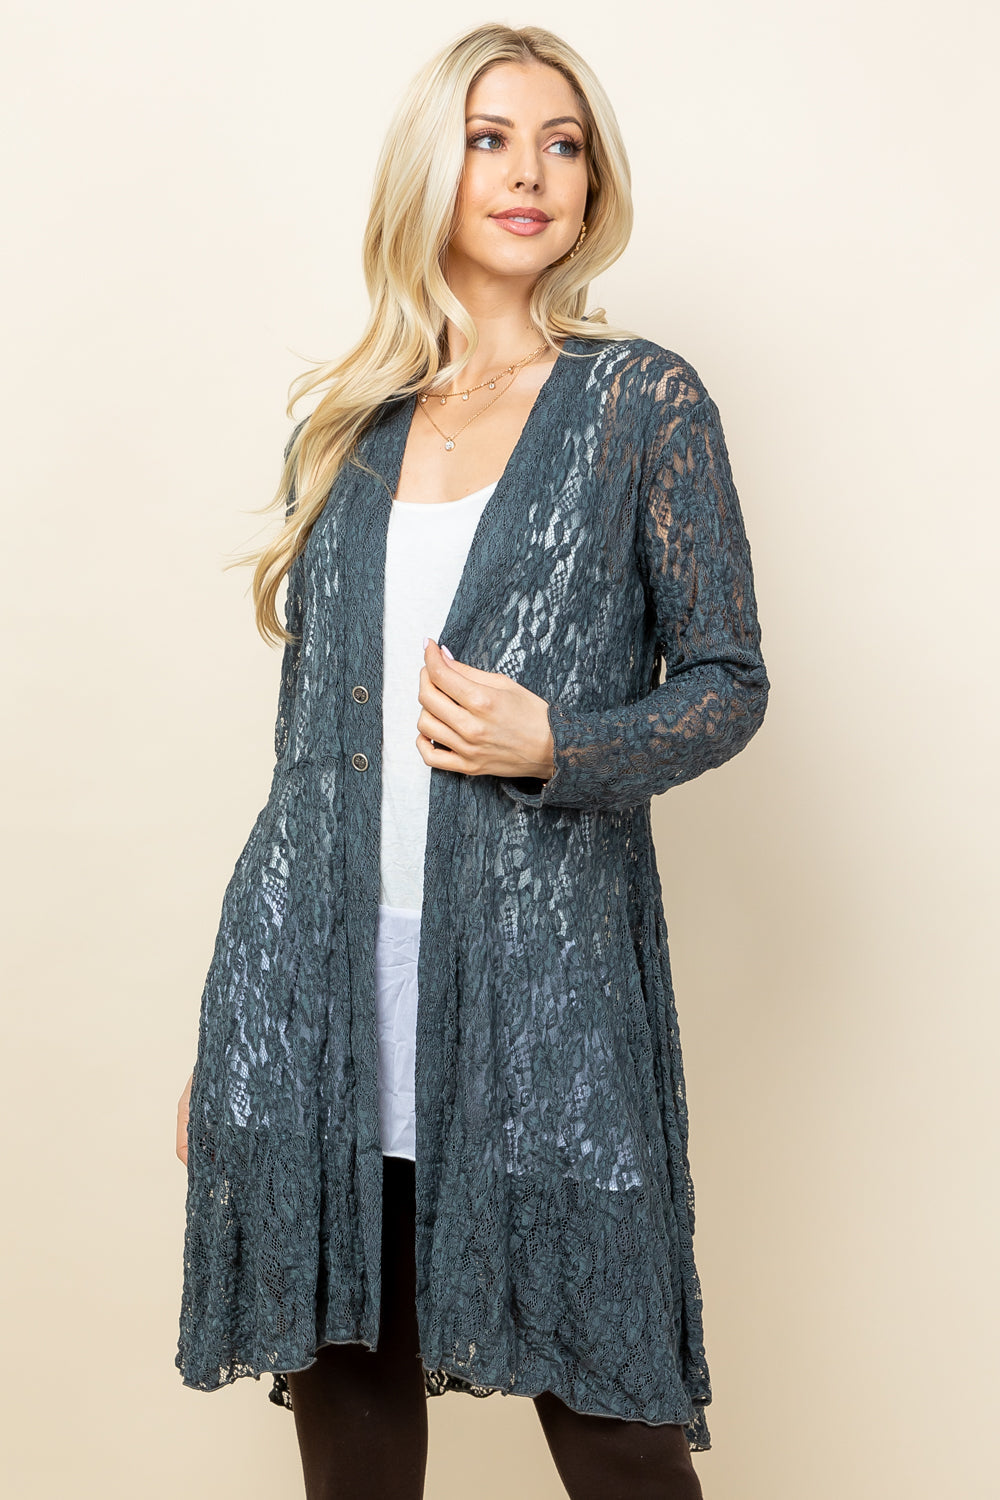 Pucker Lace Jacket - Charcoal